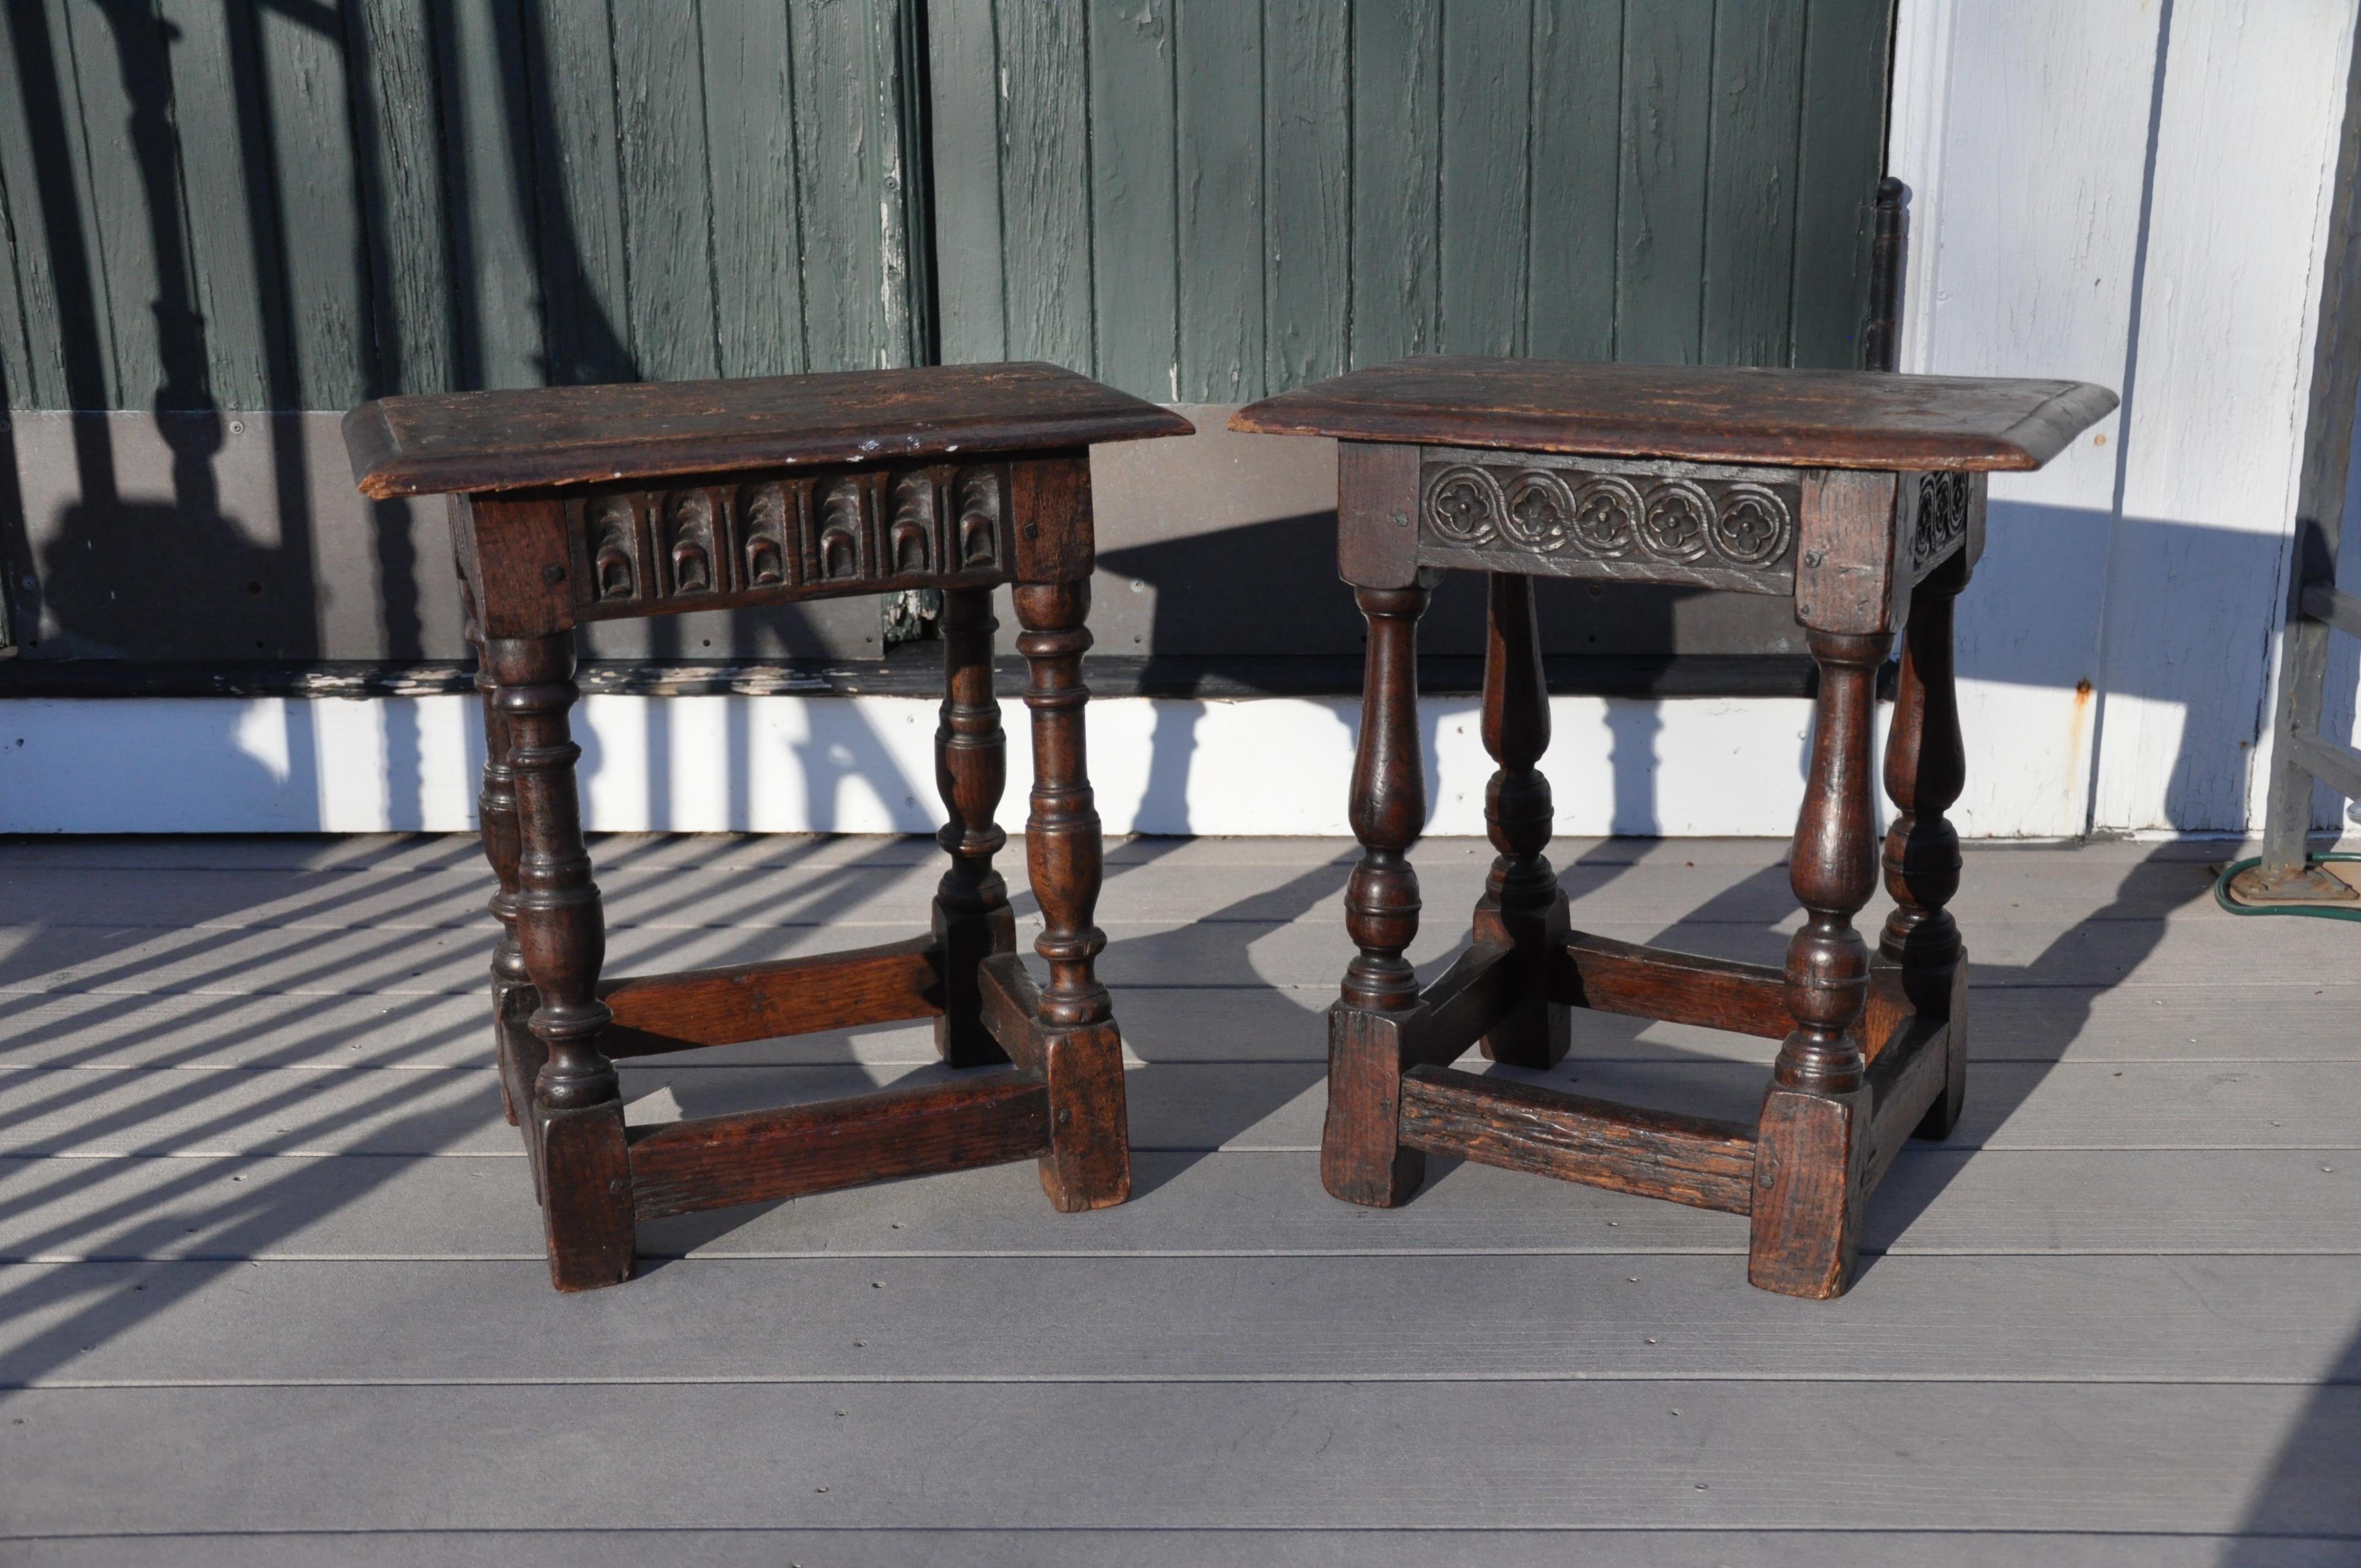 Two English Jacobean Joint stools. Original Finish. Great Patina. From an Ipswich, MA Family Collection.